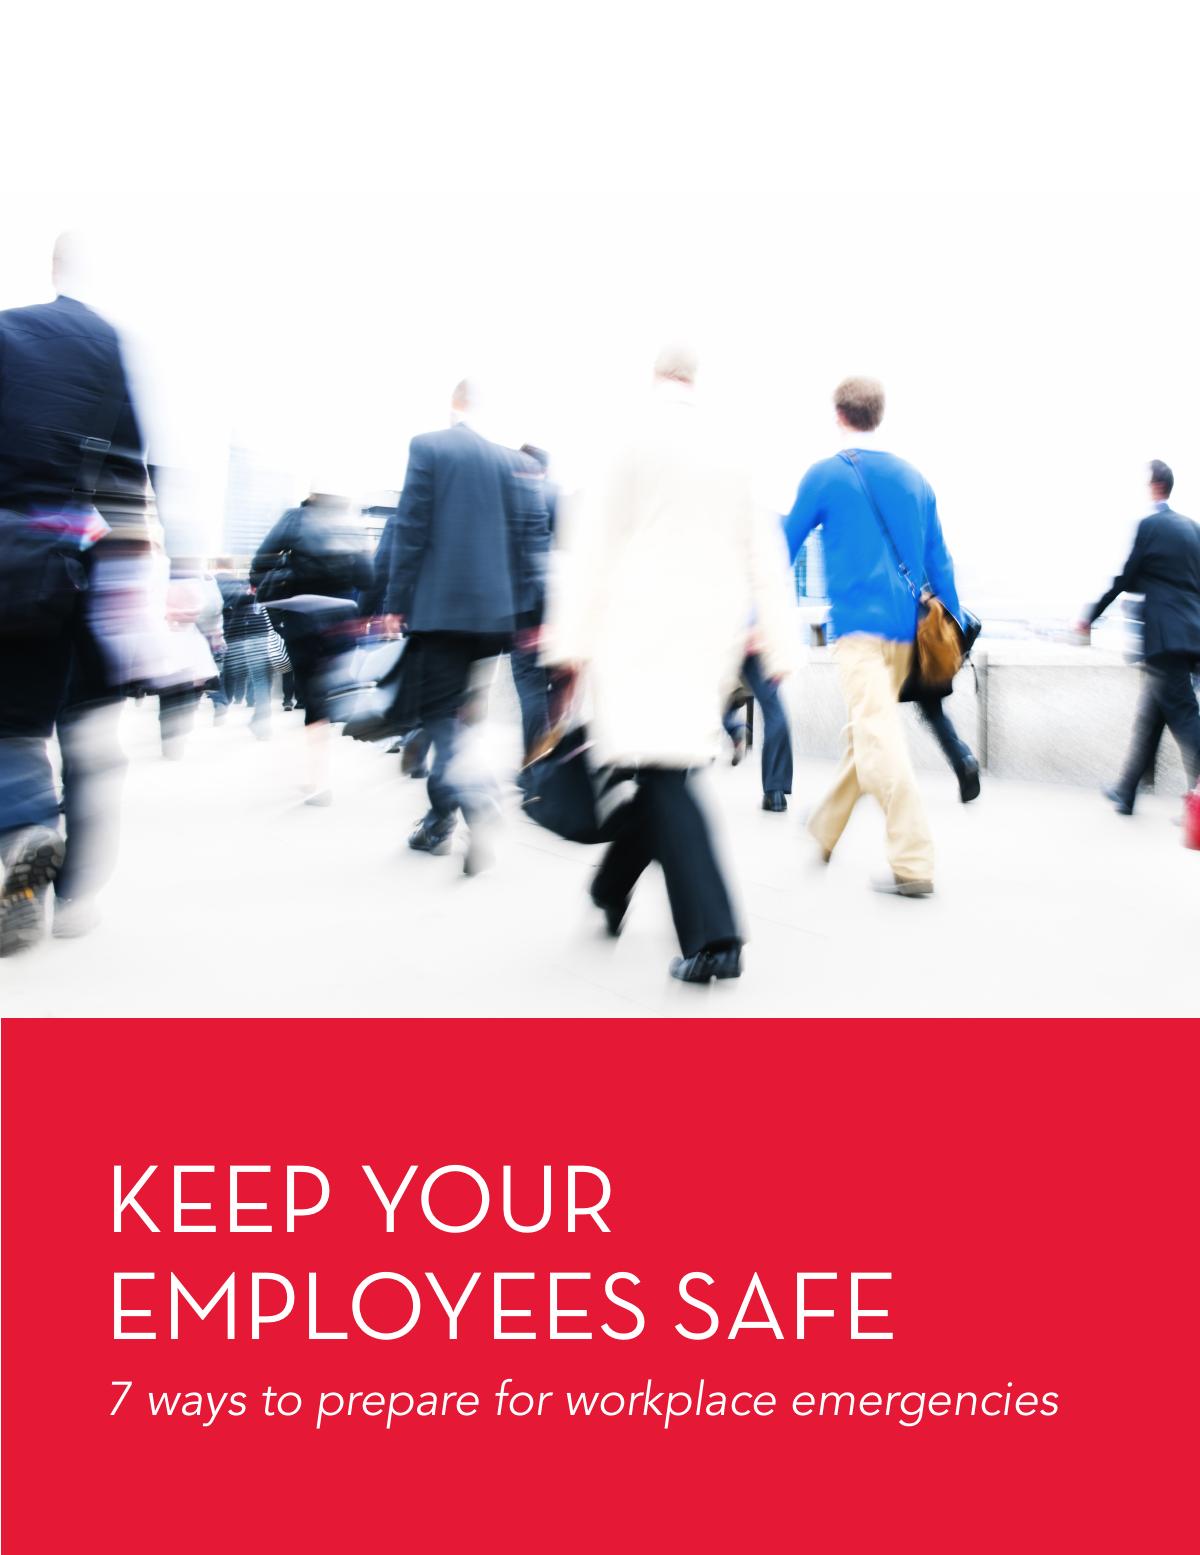 Keep Your Employees Safe: 7 Ways To Prepare For Workplace Emergencies